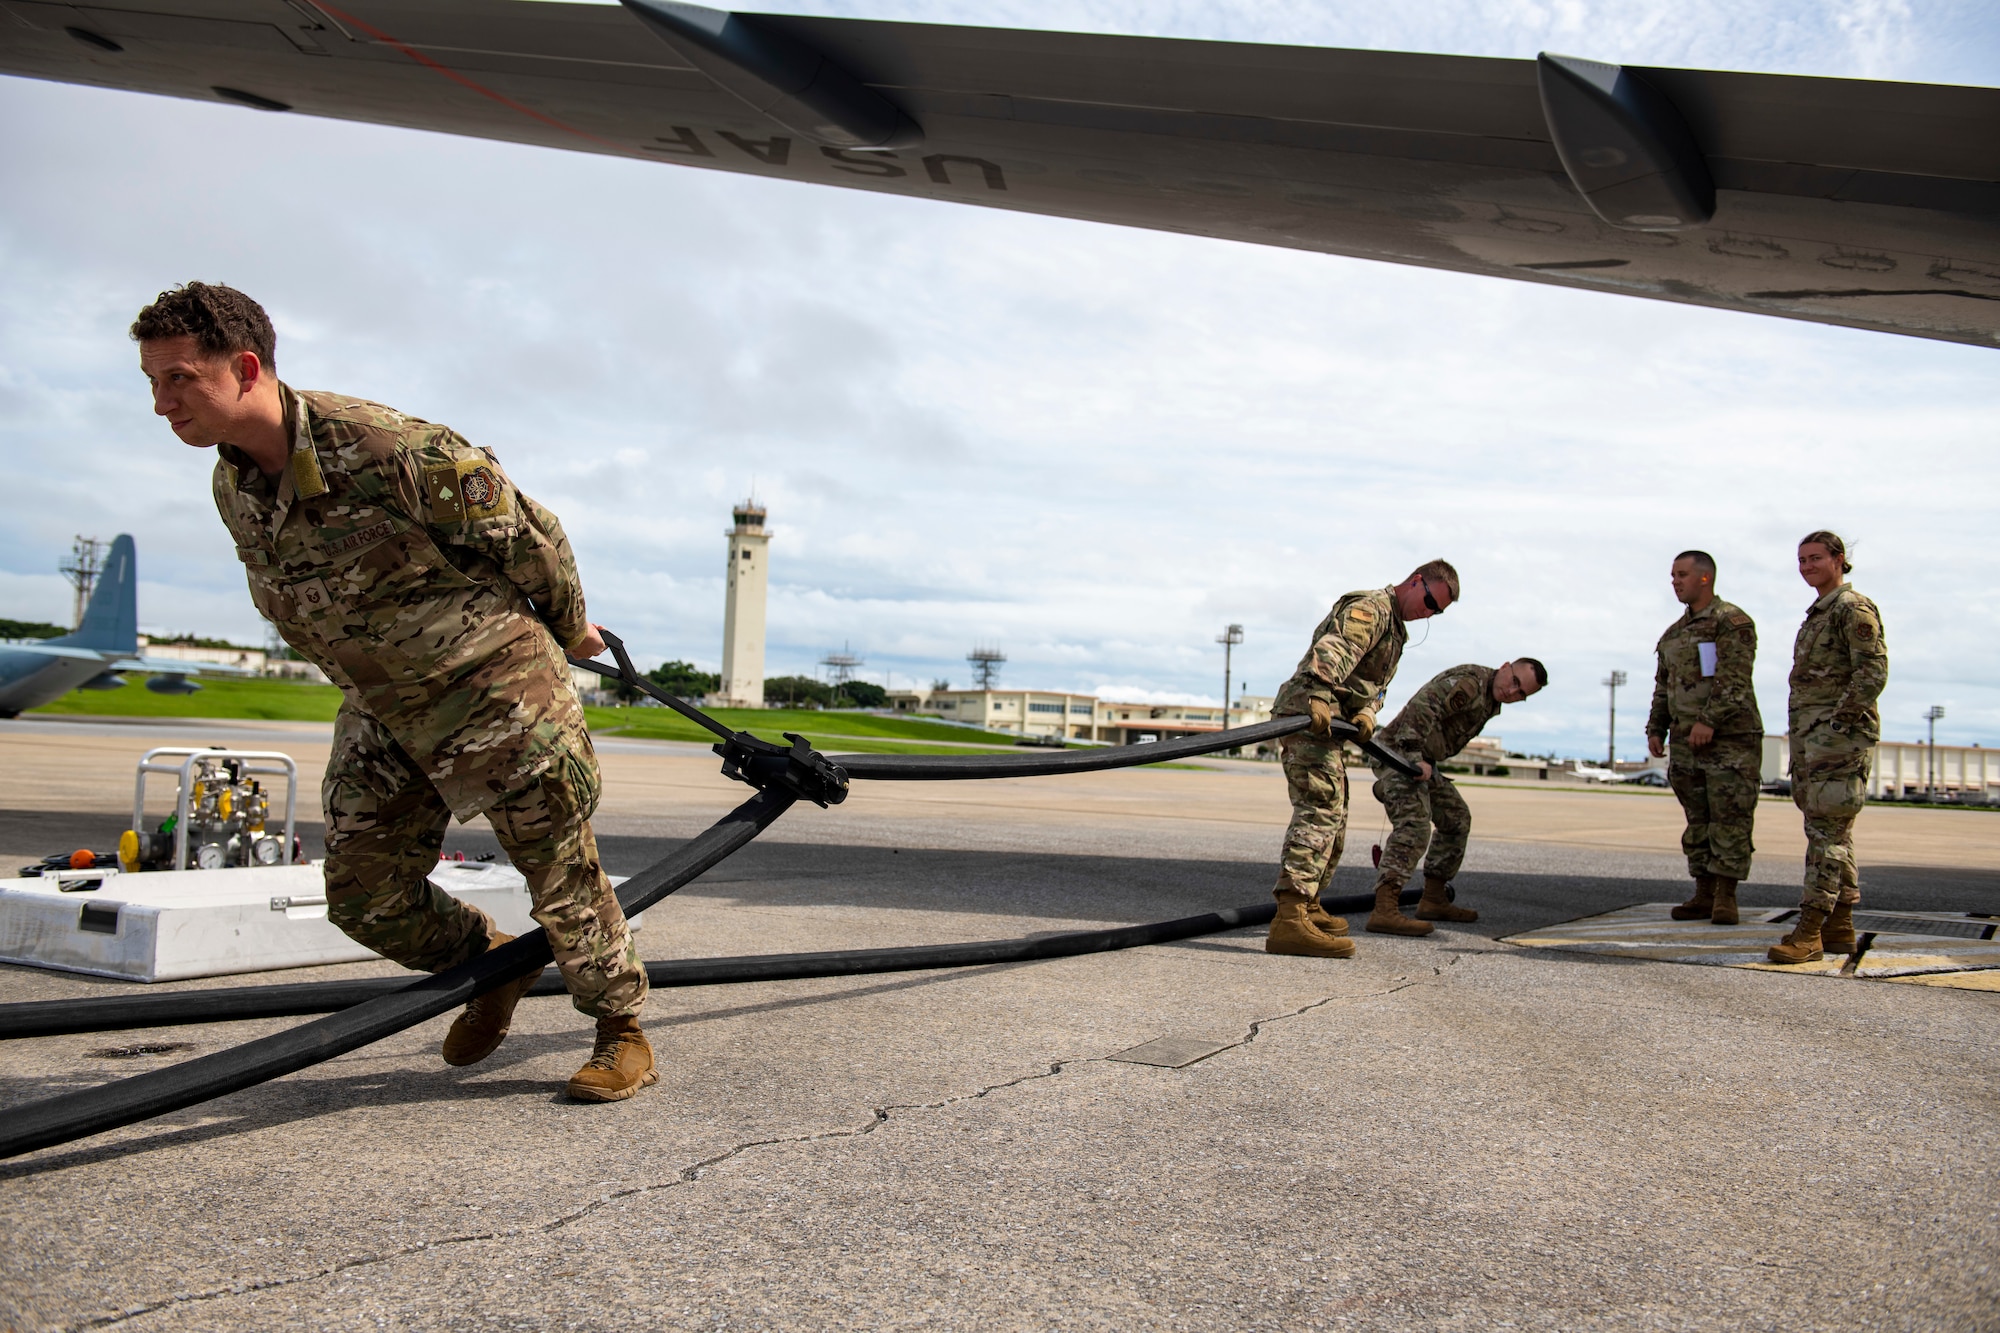 Airmen from the 18th LRS remove excess fuel from a hose after refueling a KC-46.